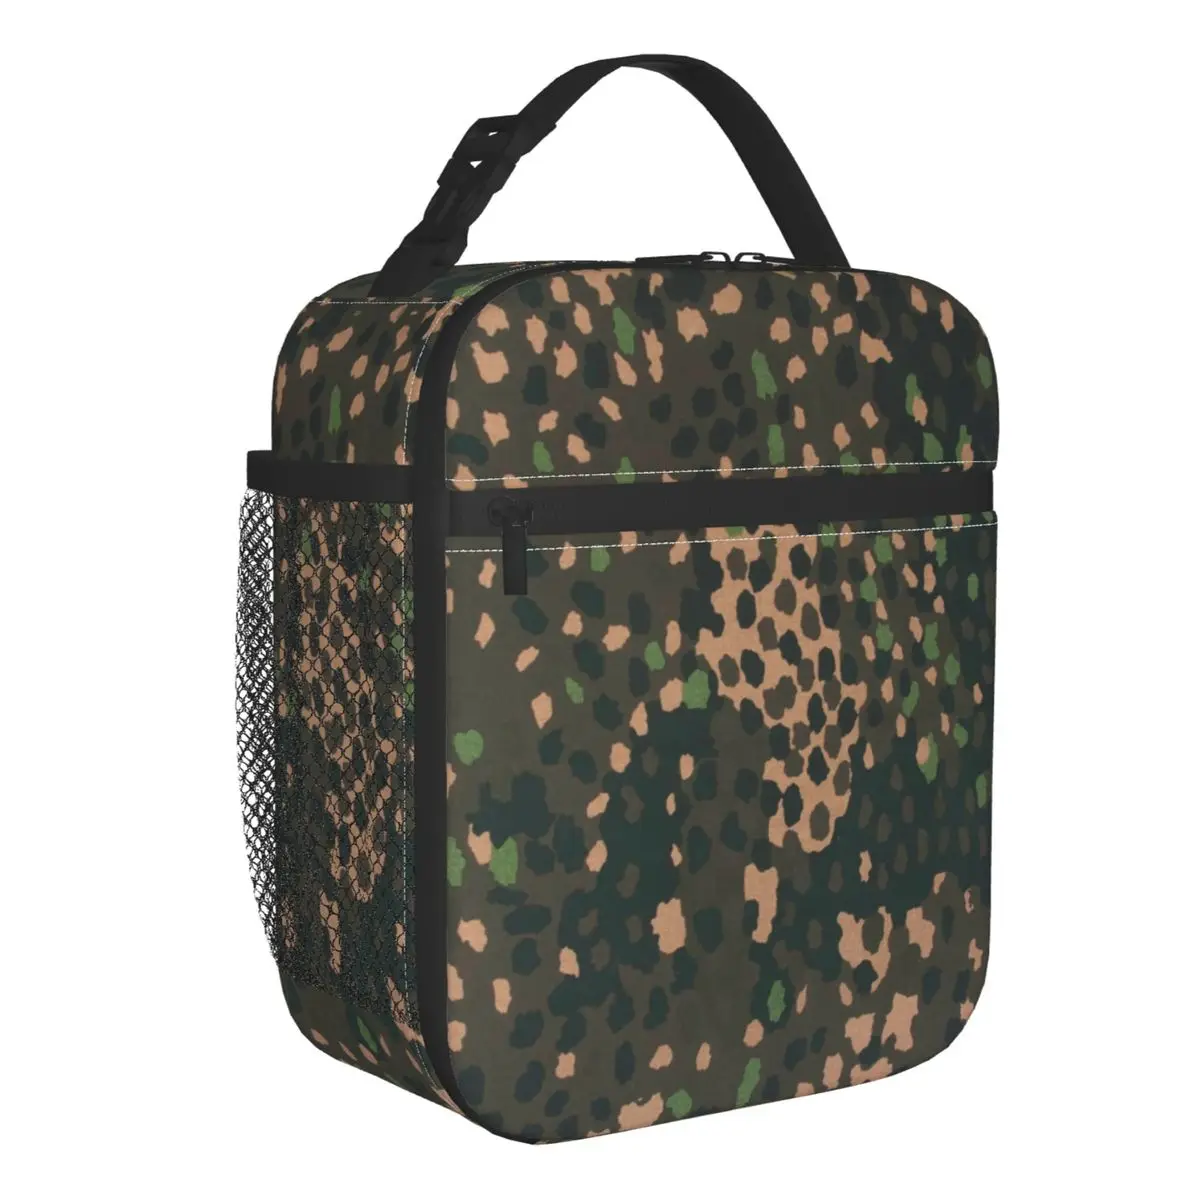 

Erbsenmuster Pea Dot German Camo Insulated Lunch Bag for Work School Military Army Camouflage Portable Cooler Thermal Bento Box